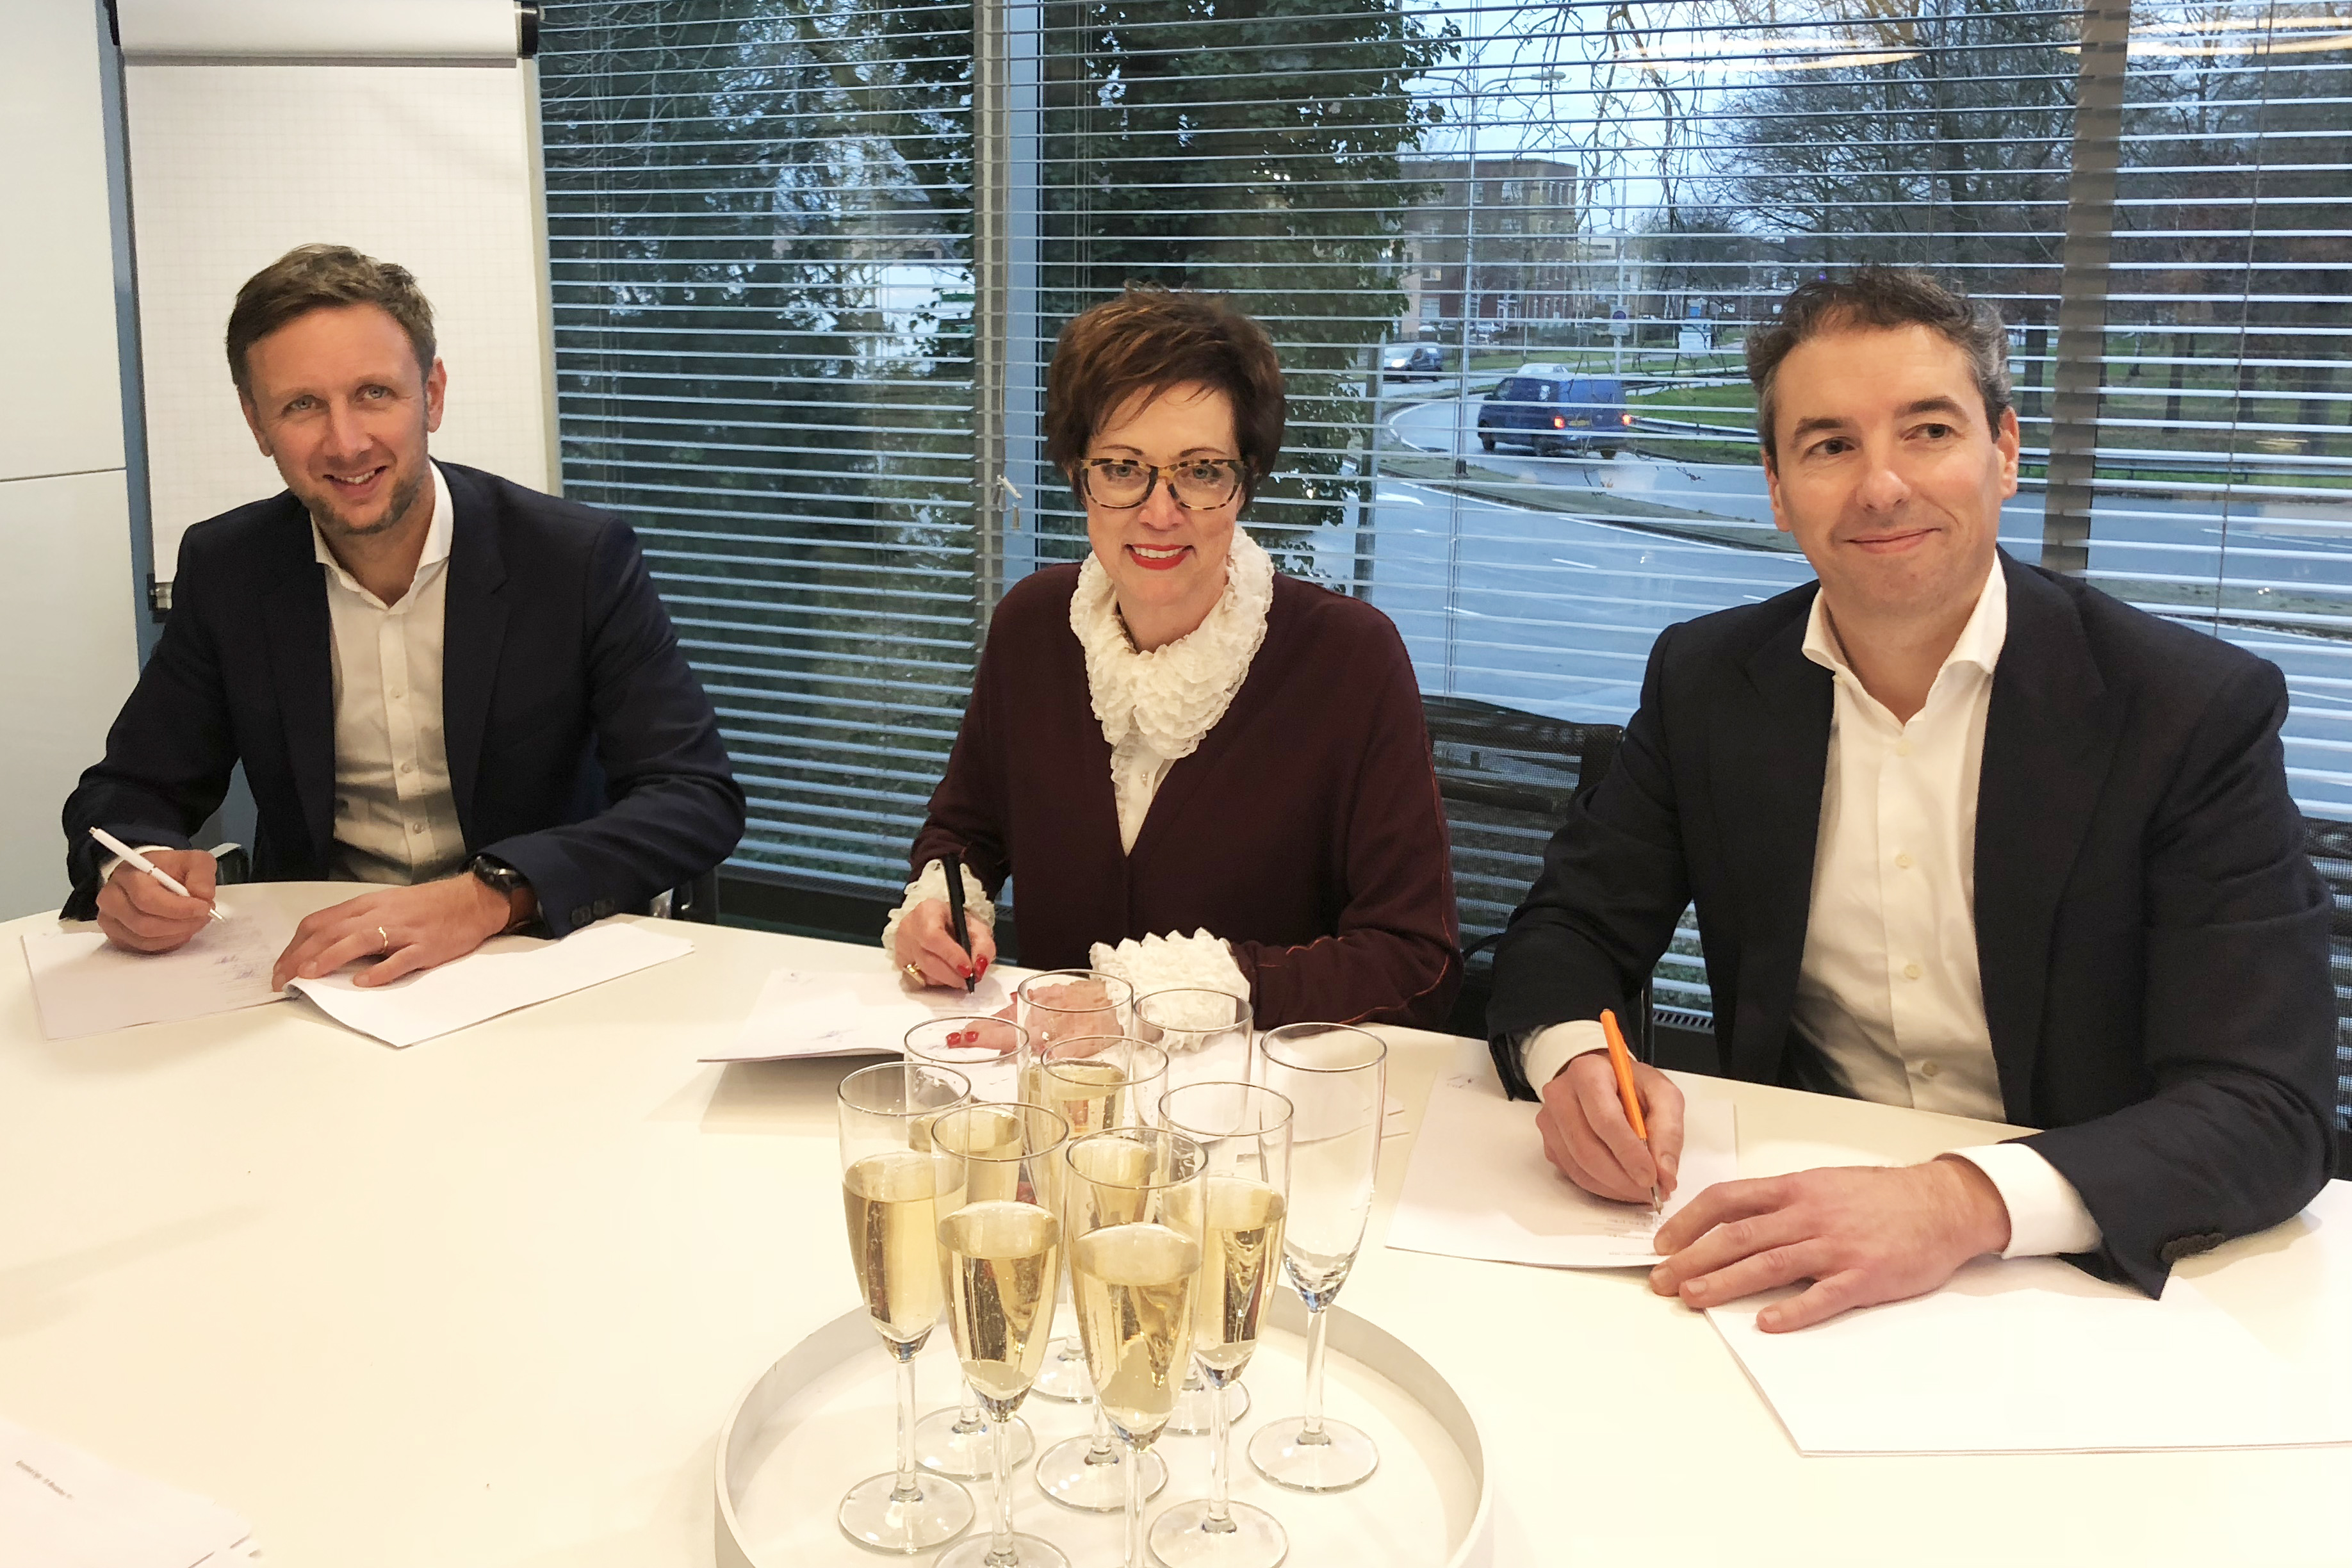 Miriam Dragstra (middle) of BOM with co-founders of Additive Industries Jonas Wintermans (left) and Daan Kersten (right) sign the agreement. Image via Additive Industries.